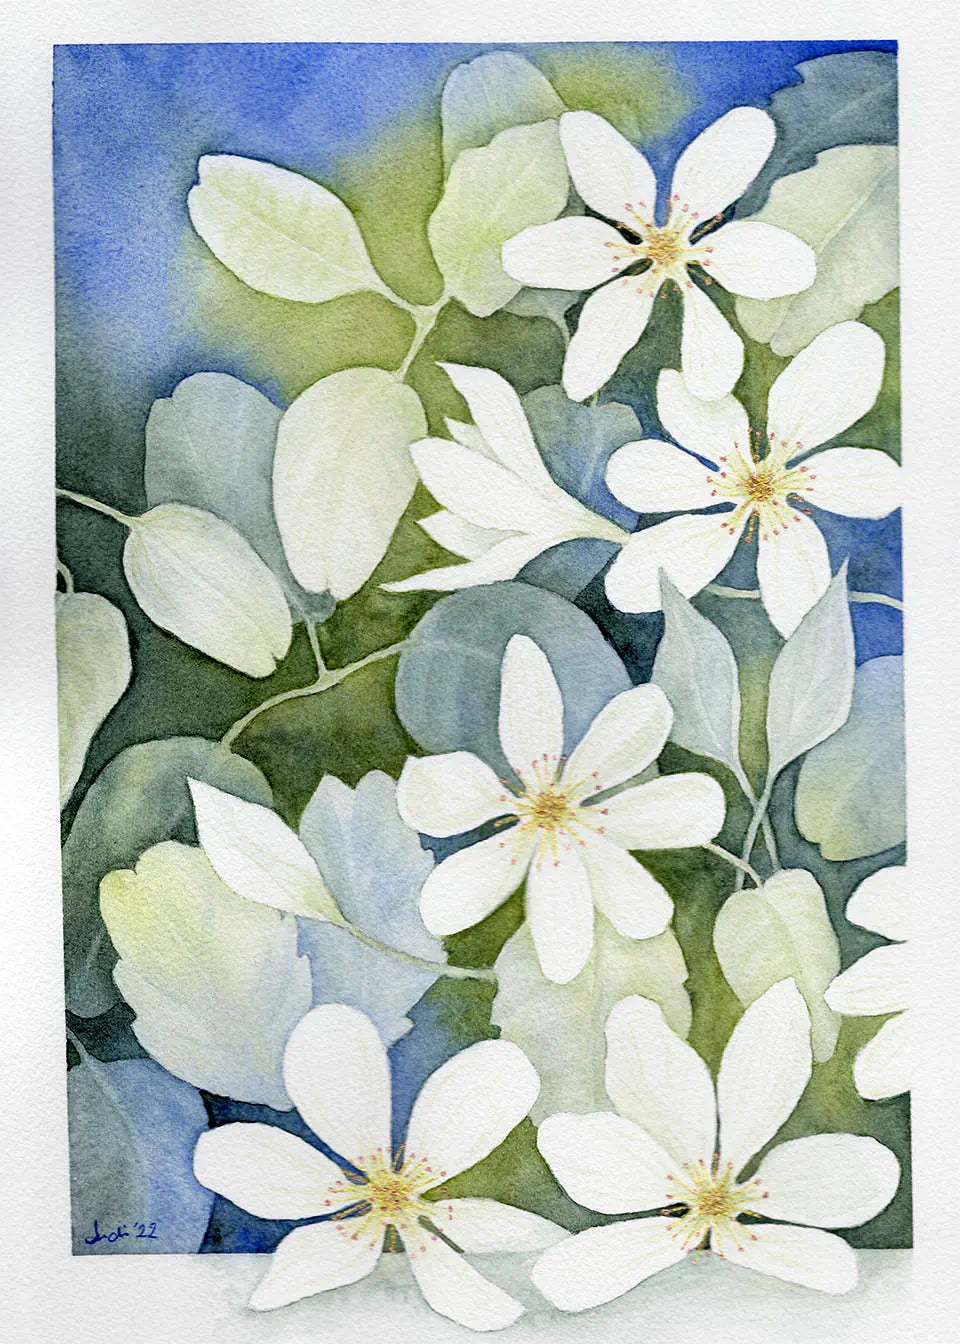 A watercolour botanical of clematis flowers and leaves in shades of green and blue with gold accents